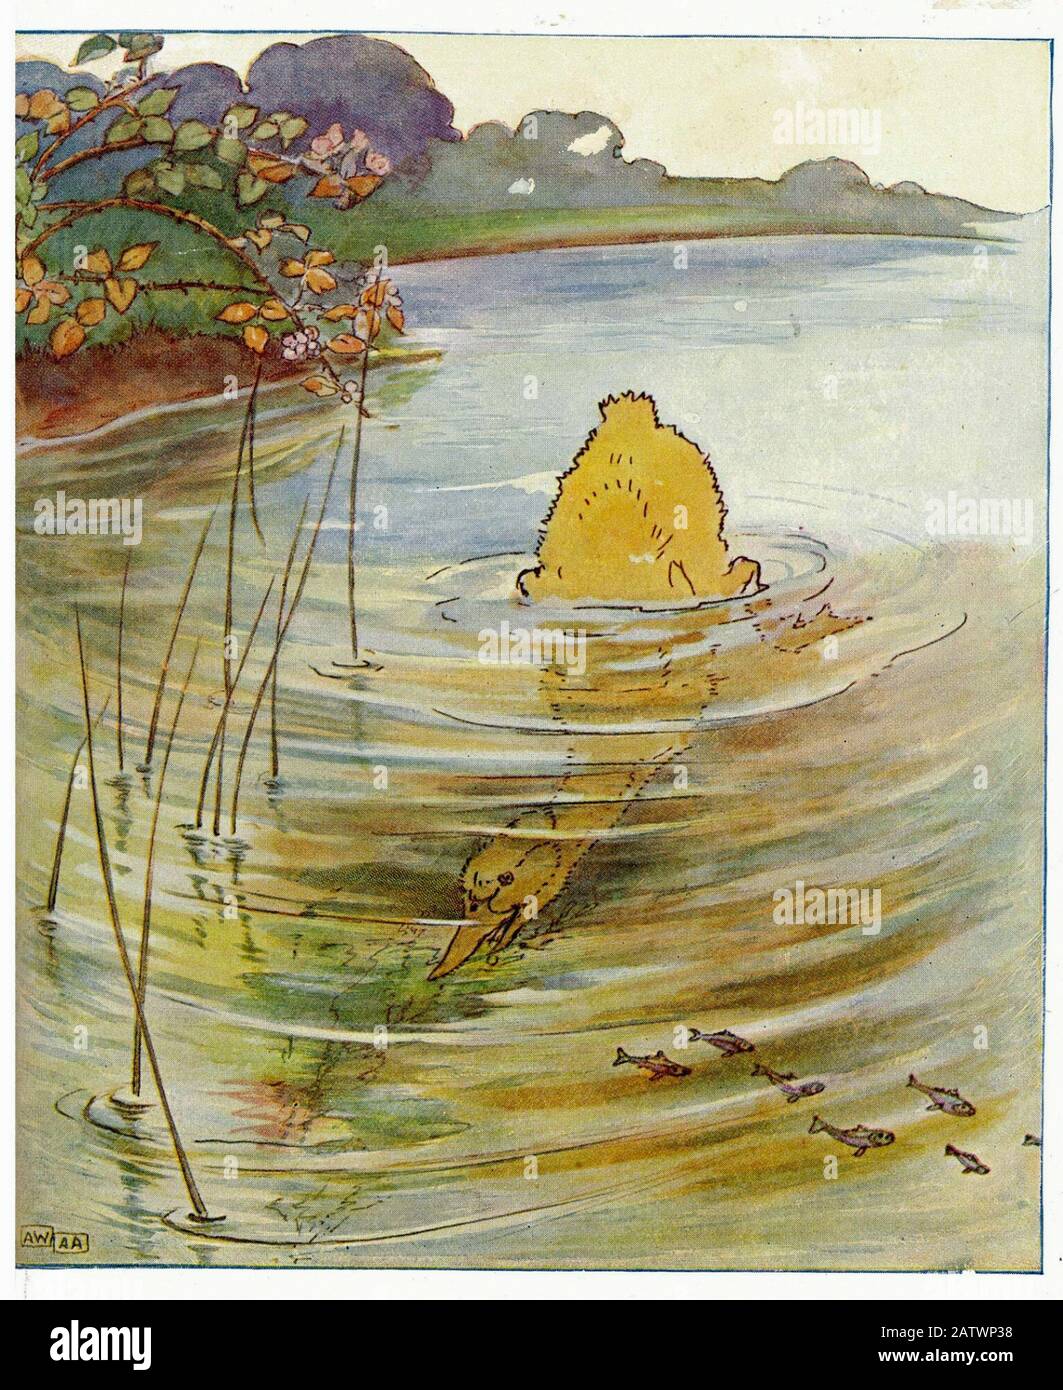 The Daring Duckie Book 1915 -  Illustration by Anne Anderson (1874 - 1930) Stock Photo